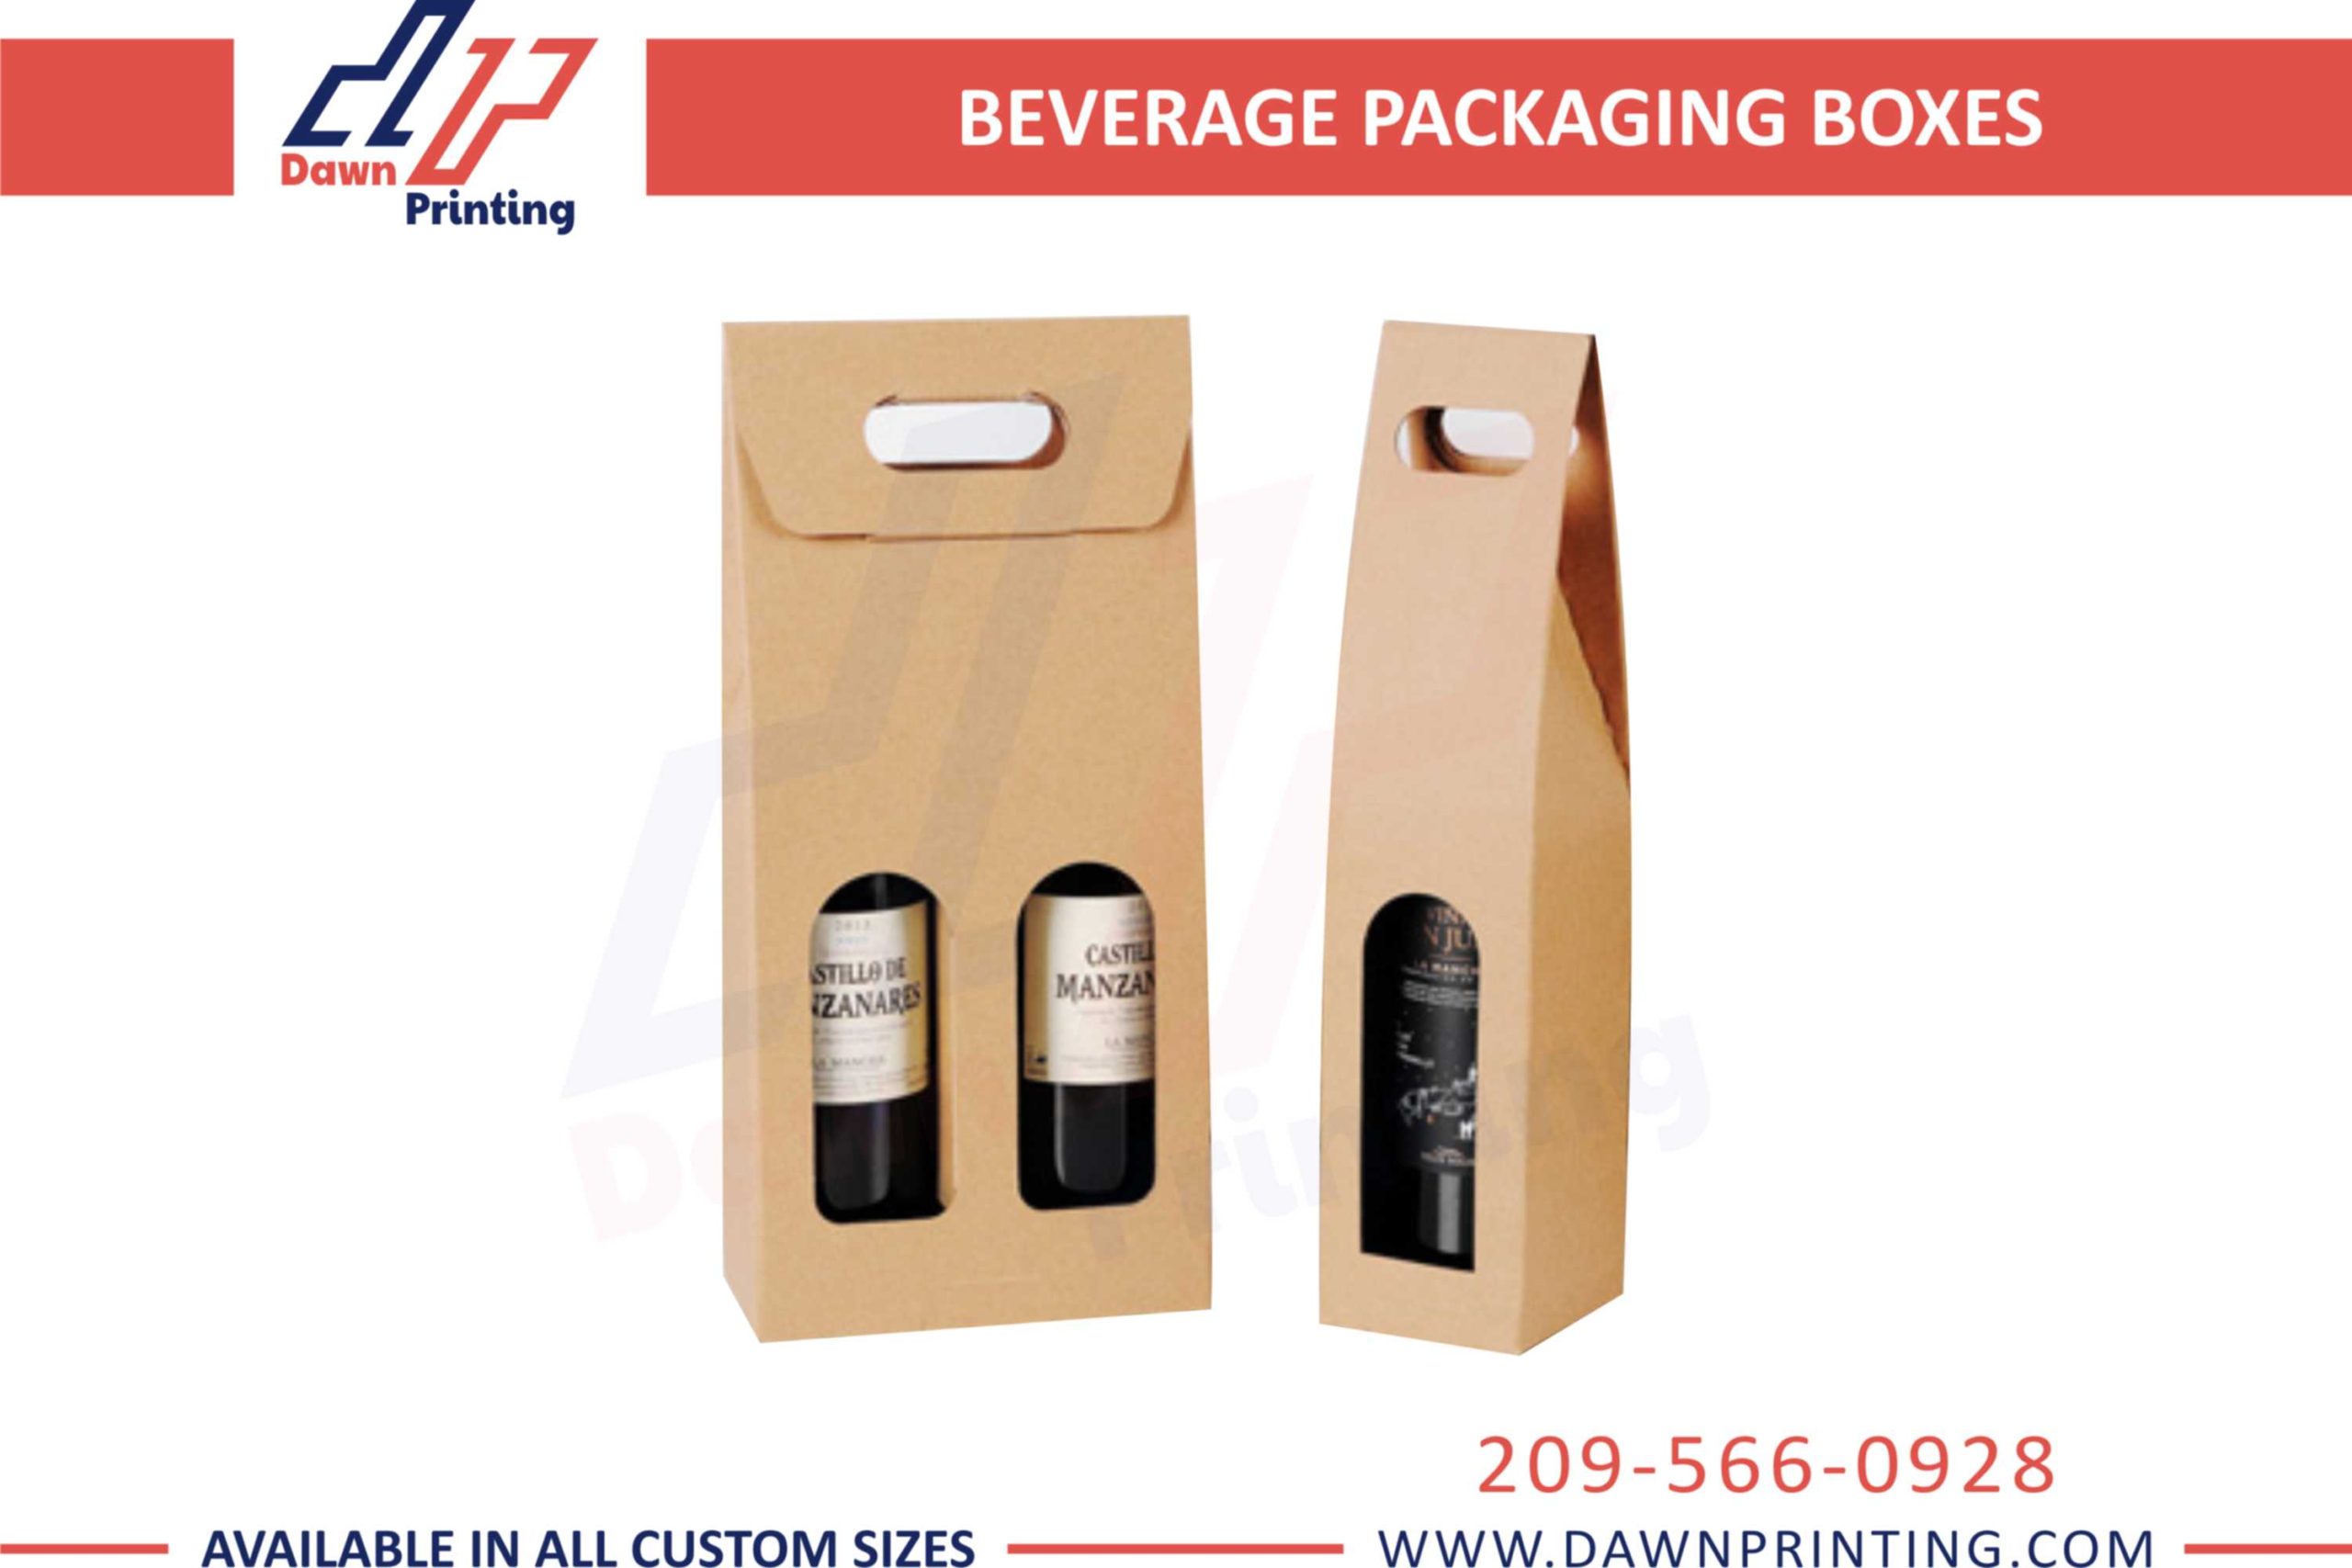 Beverage Packaging Boxes with clear Window - Dawn Printing